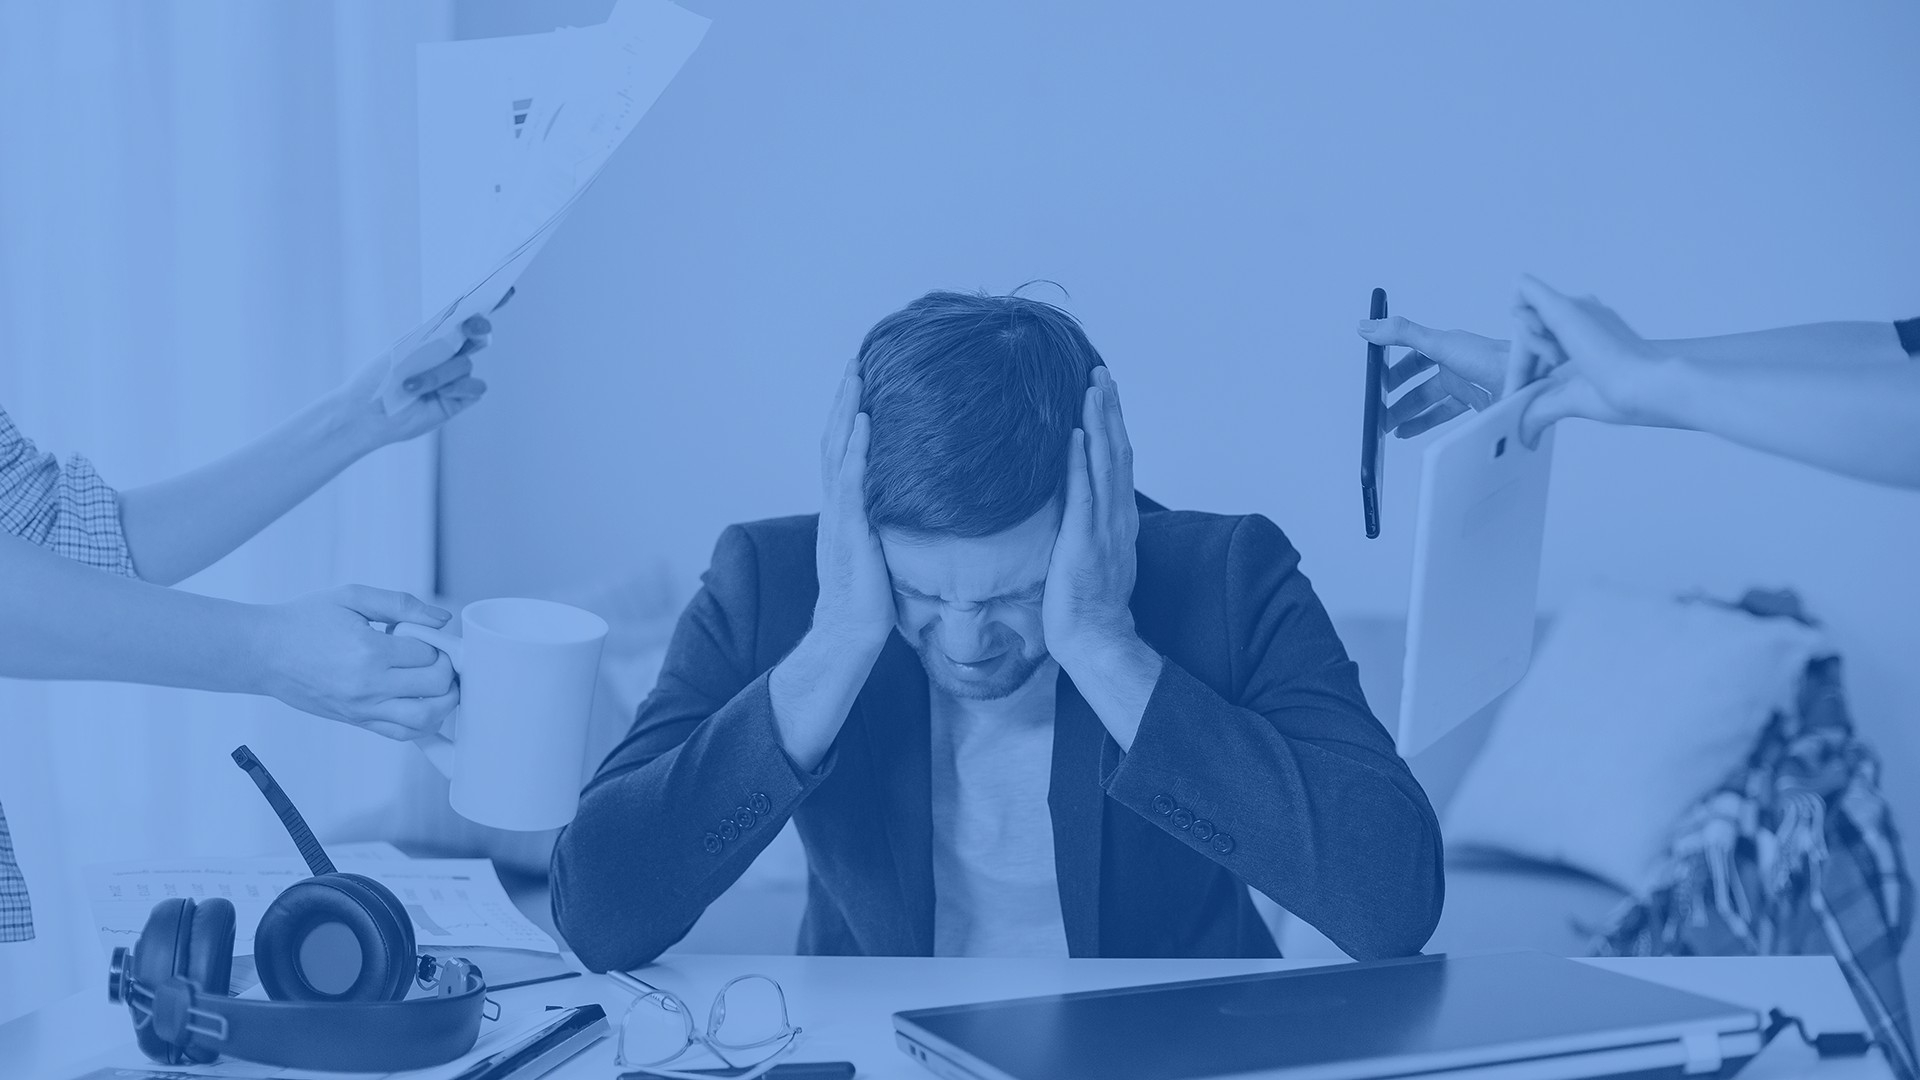 Understanding What it’s Like to Struggle as an Employee With ADHD